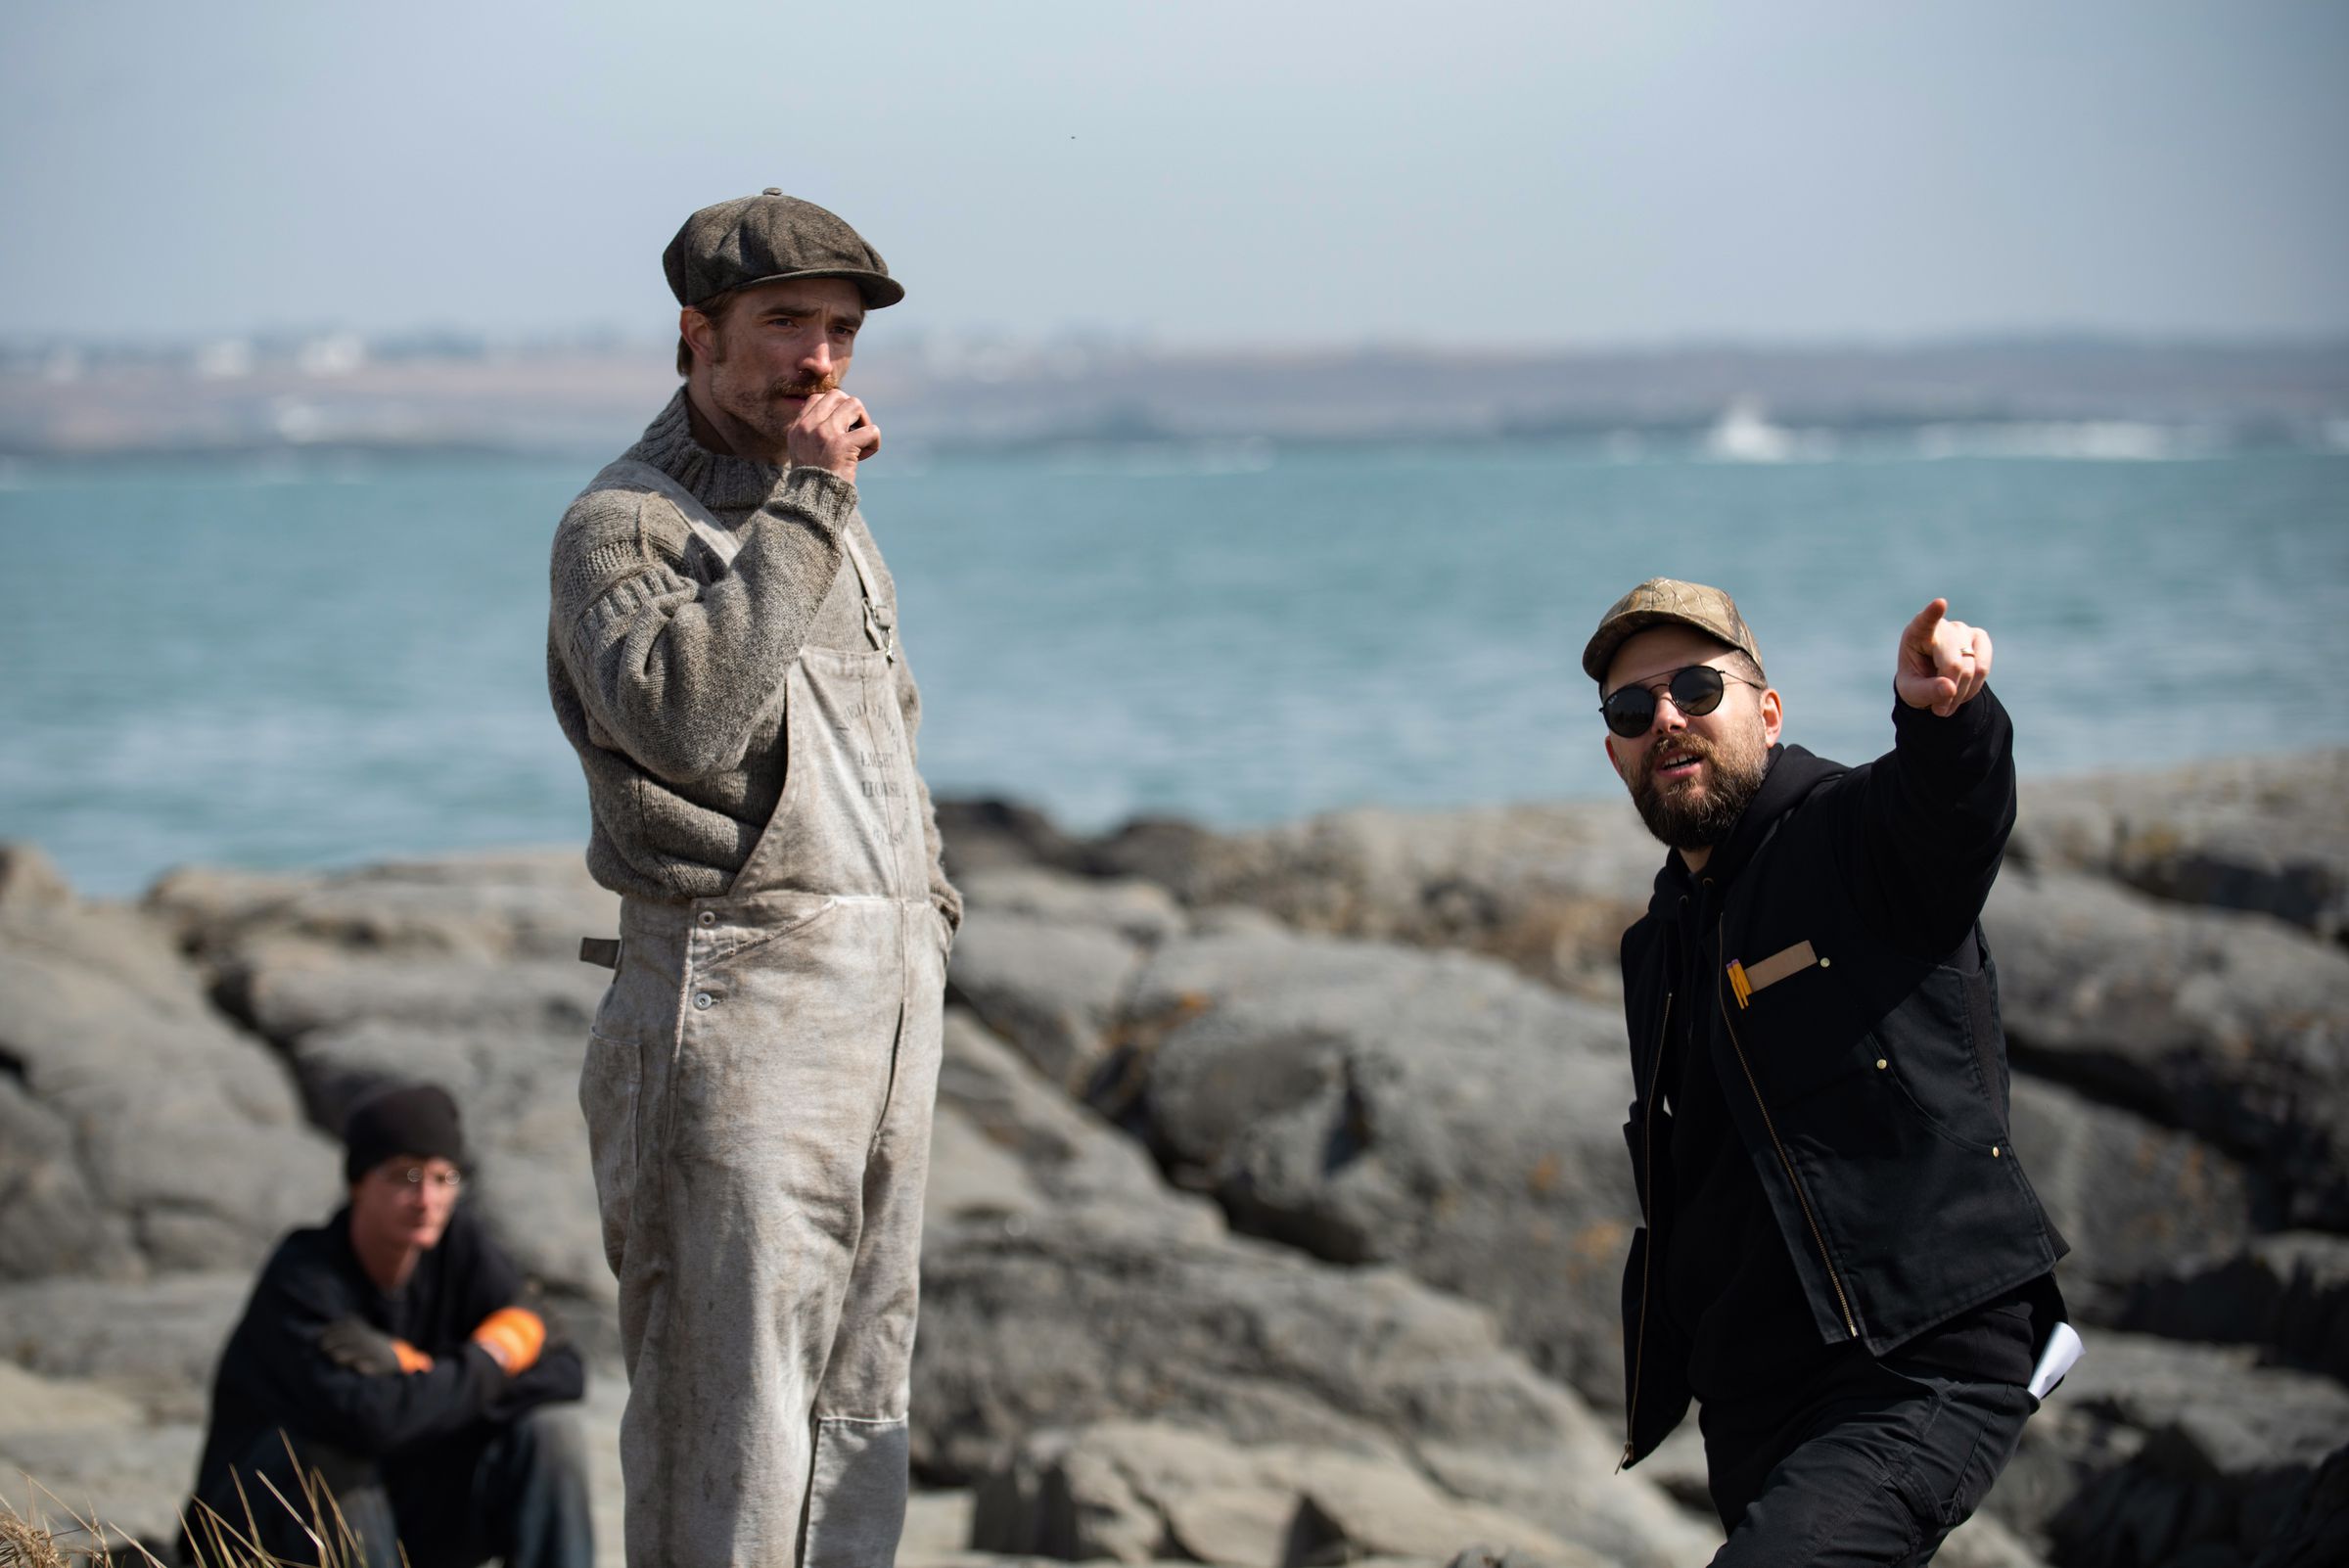 Robert Eggers (right) and Robert Pattinson on location shooting The Lighthouse